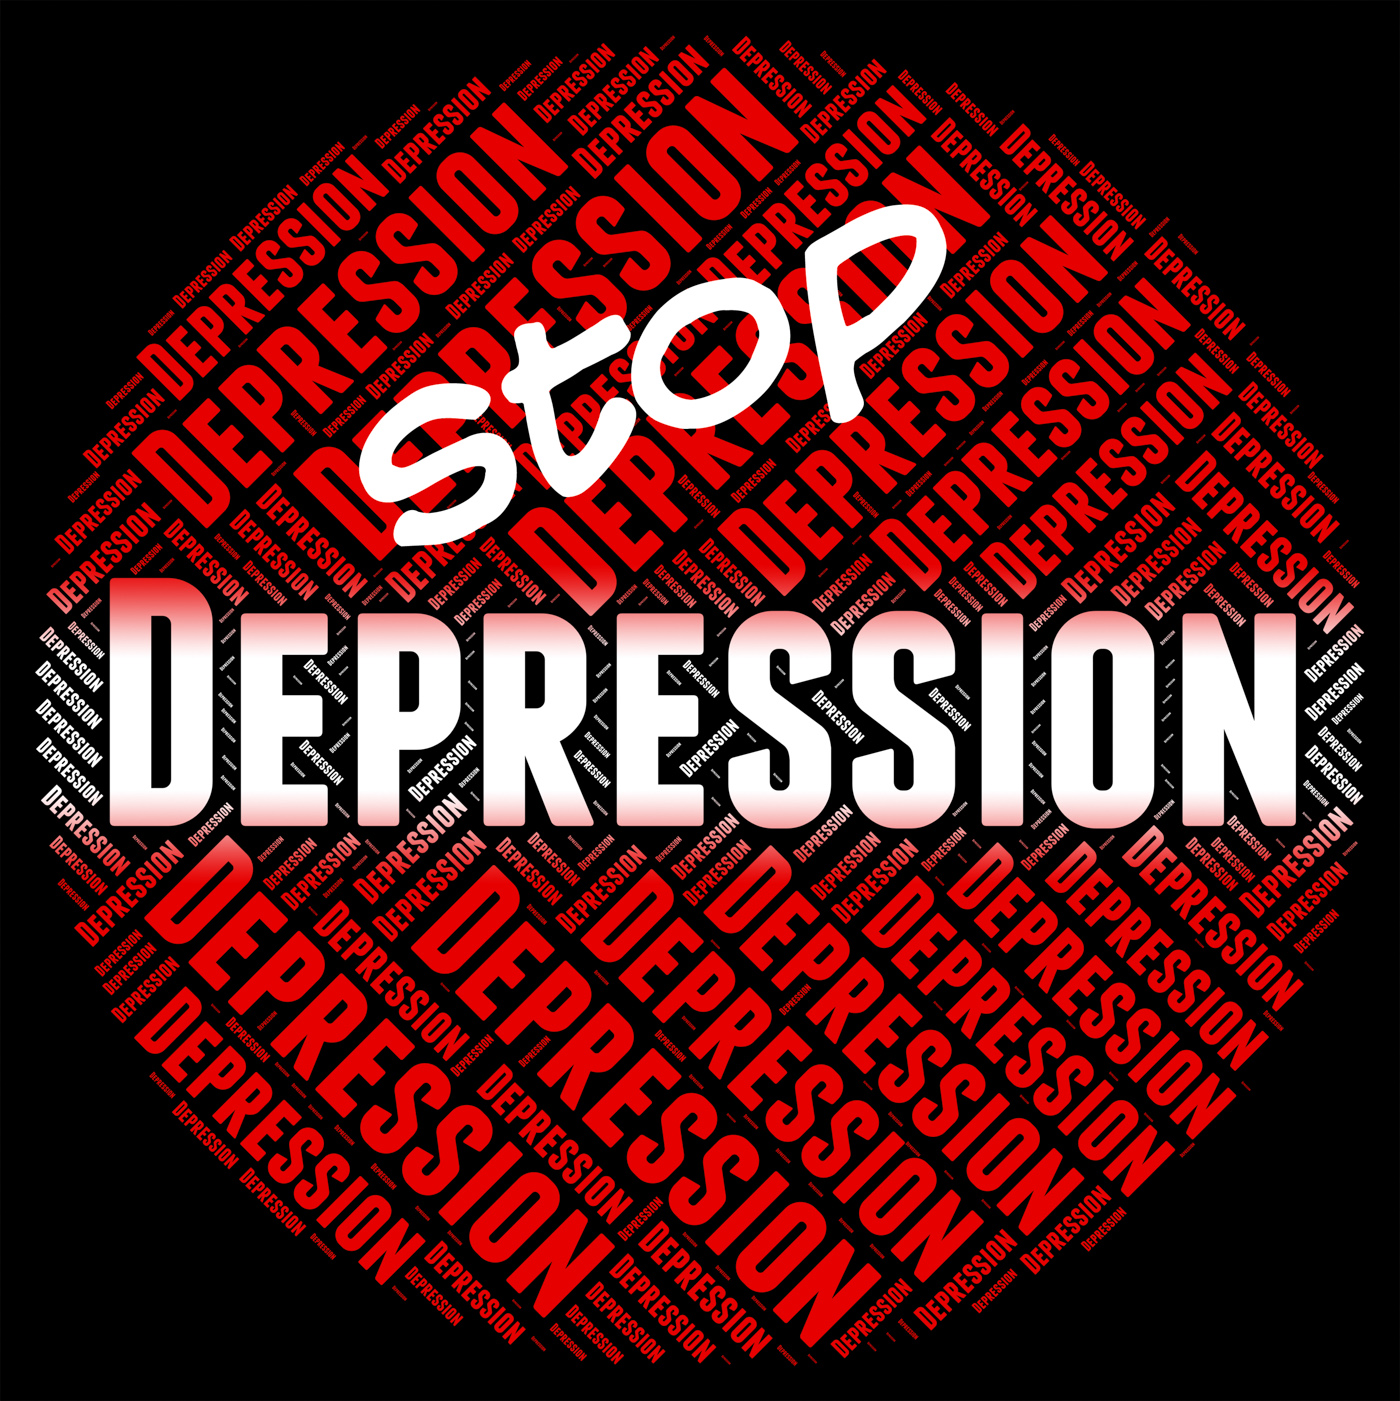 Stop depression represents lost hope and anxious photo